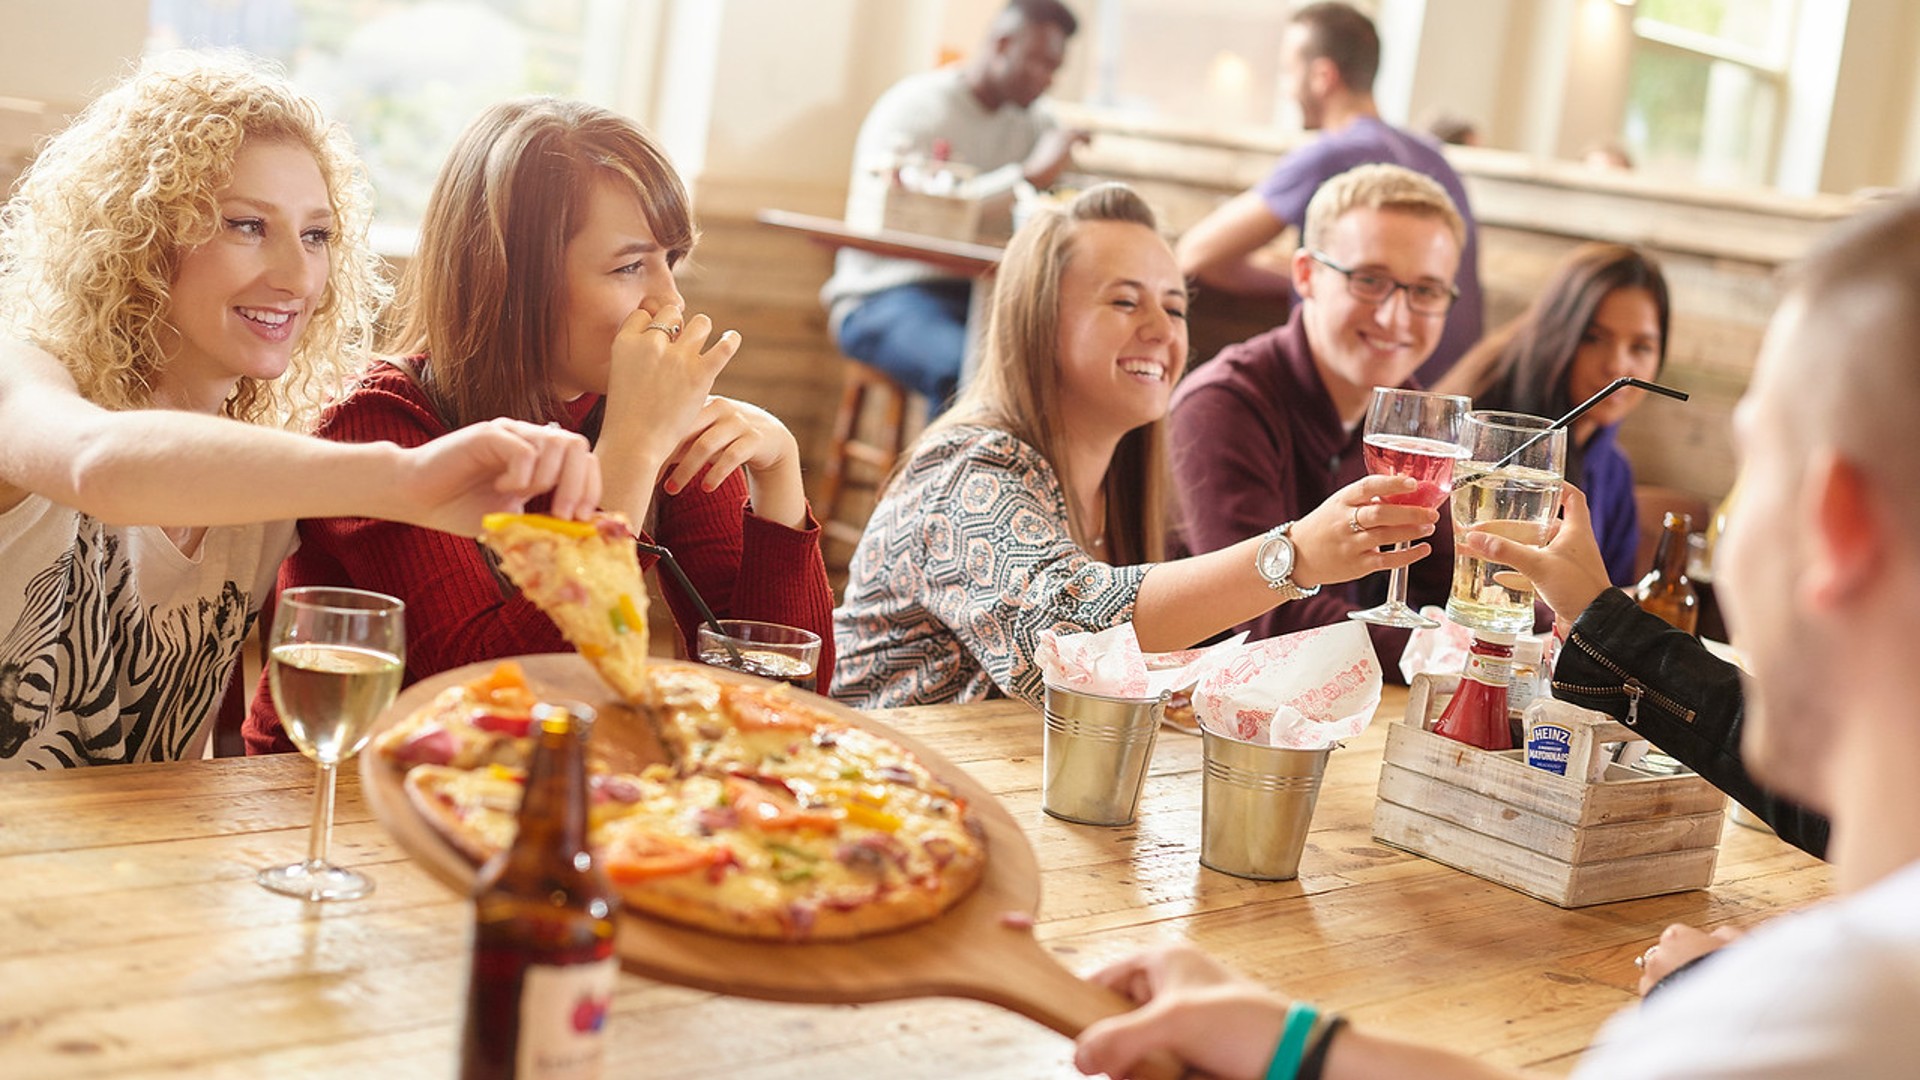 Students drink and share pizza